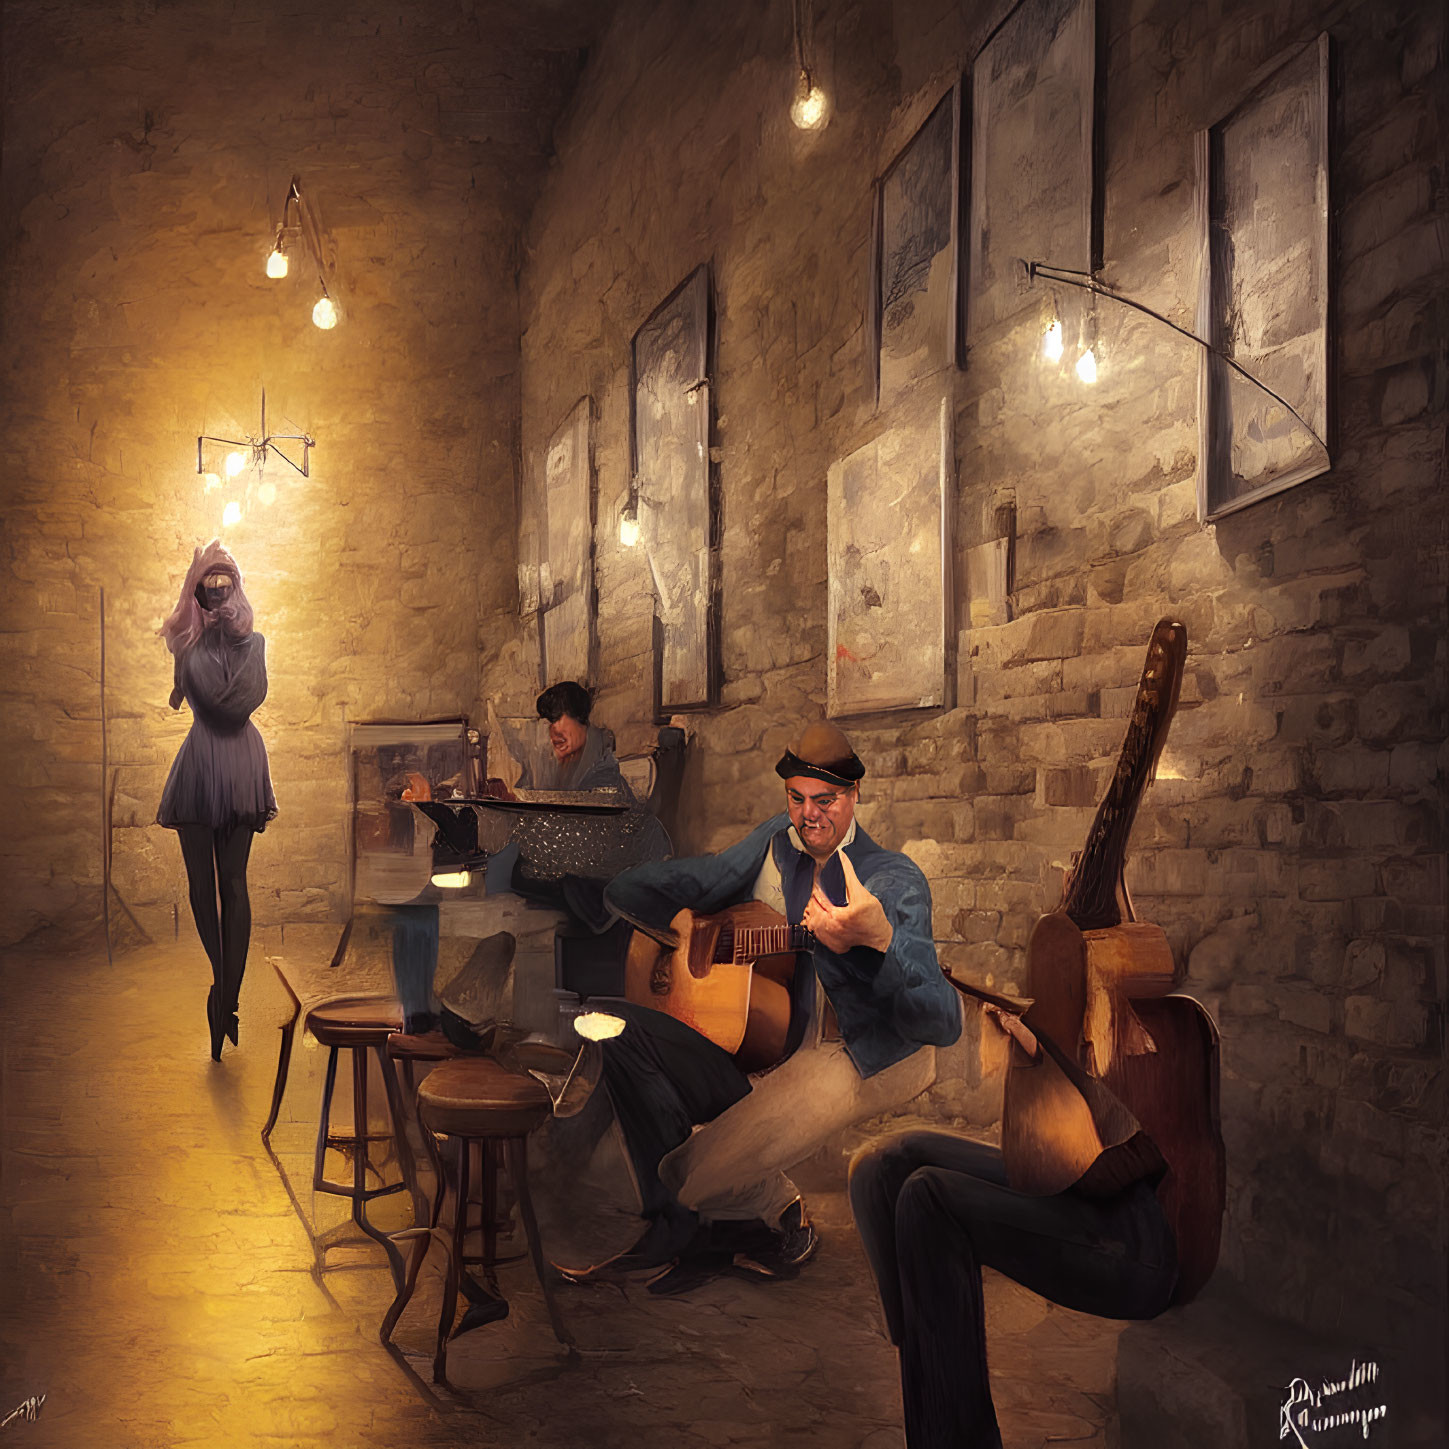 Cozy café ambiance with guitarist, writer, and drinker